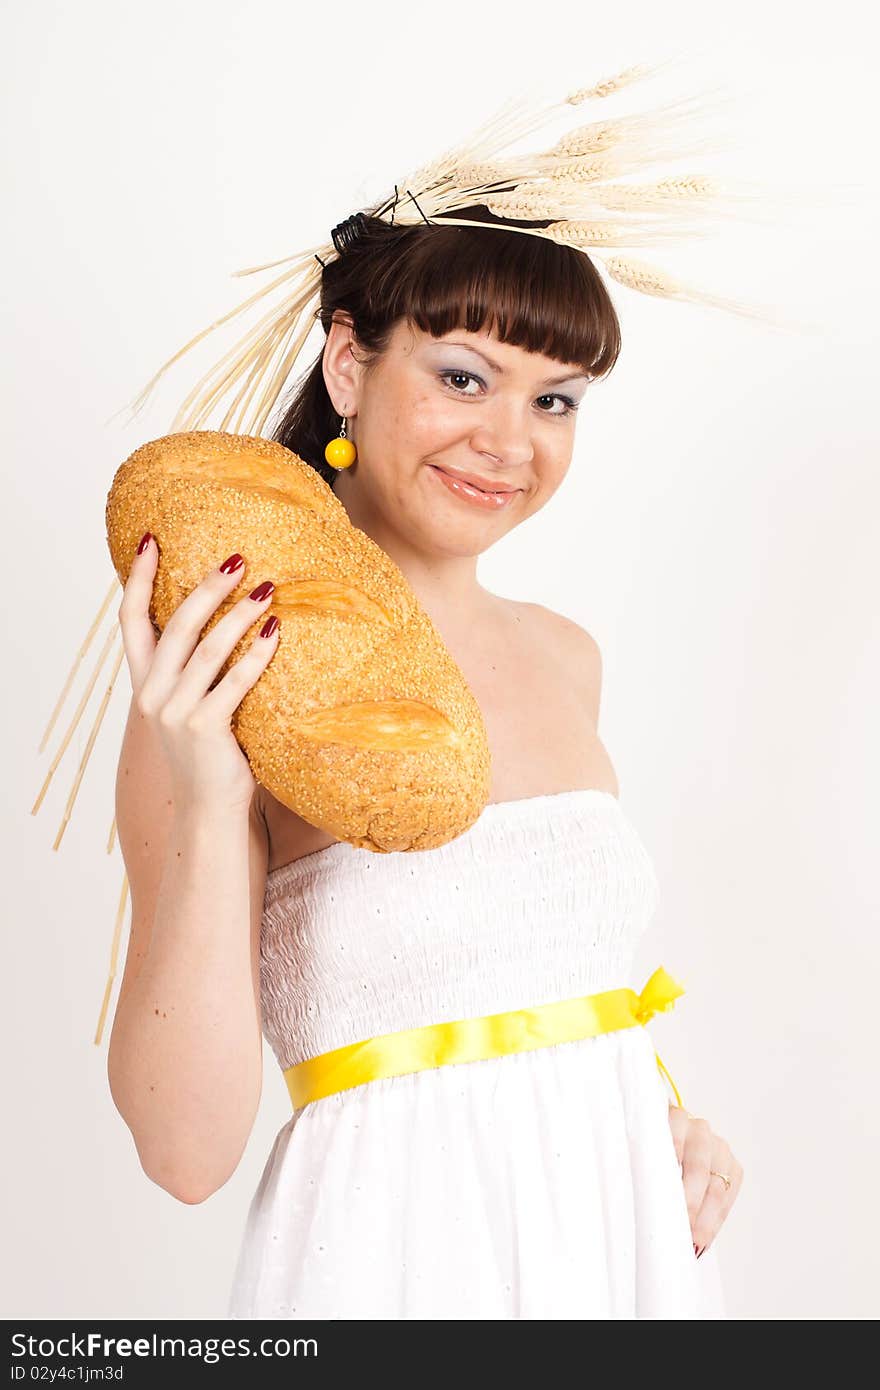 Beautiful brunette girl with ears of wheat in her hair is eating a bread isolated on the white background. Beautiful brunette girl with ears of wheat in her hair is eating a bread isolated on the white background